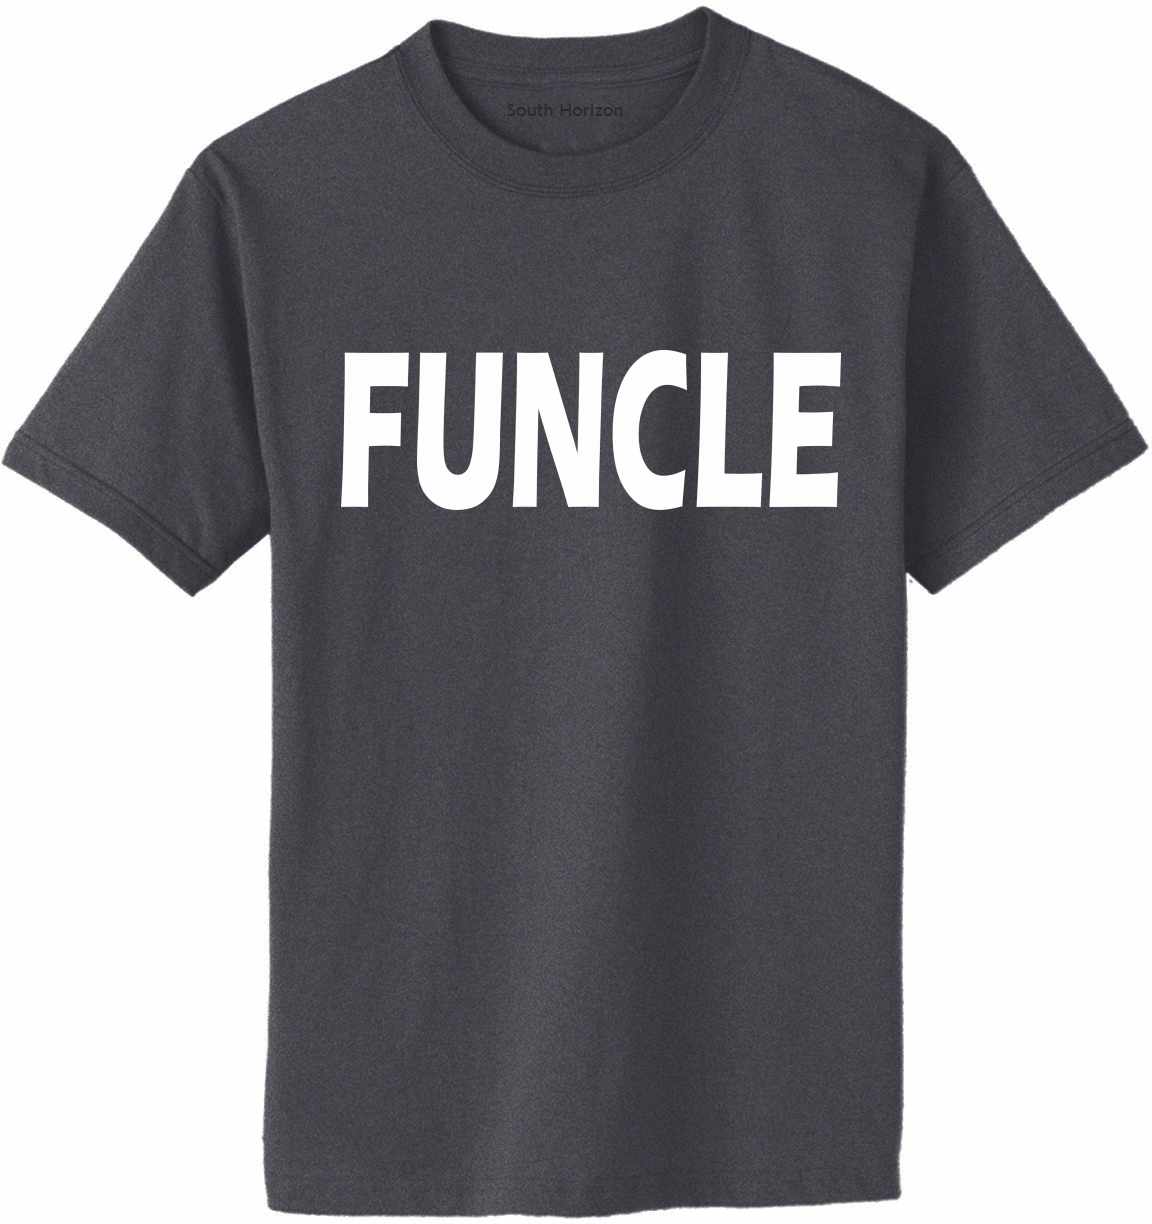 FUNCLE Adult T-Shirt